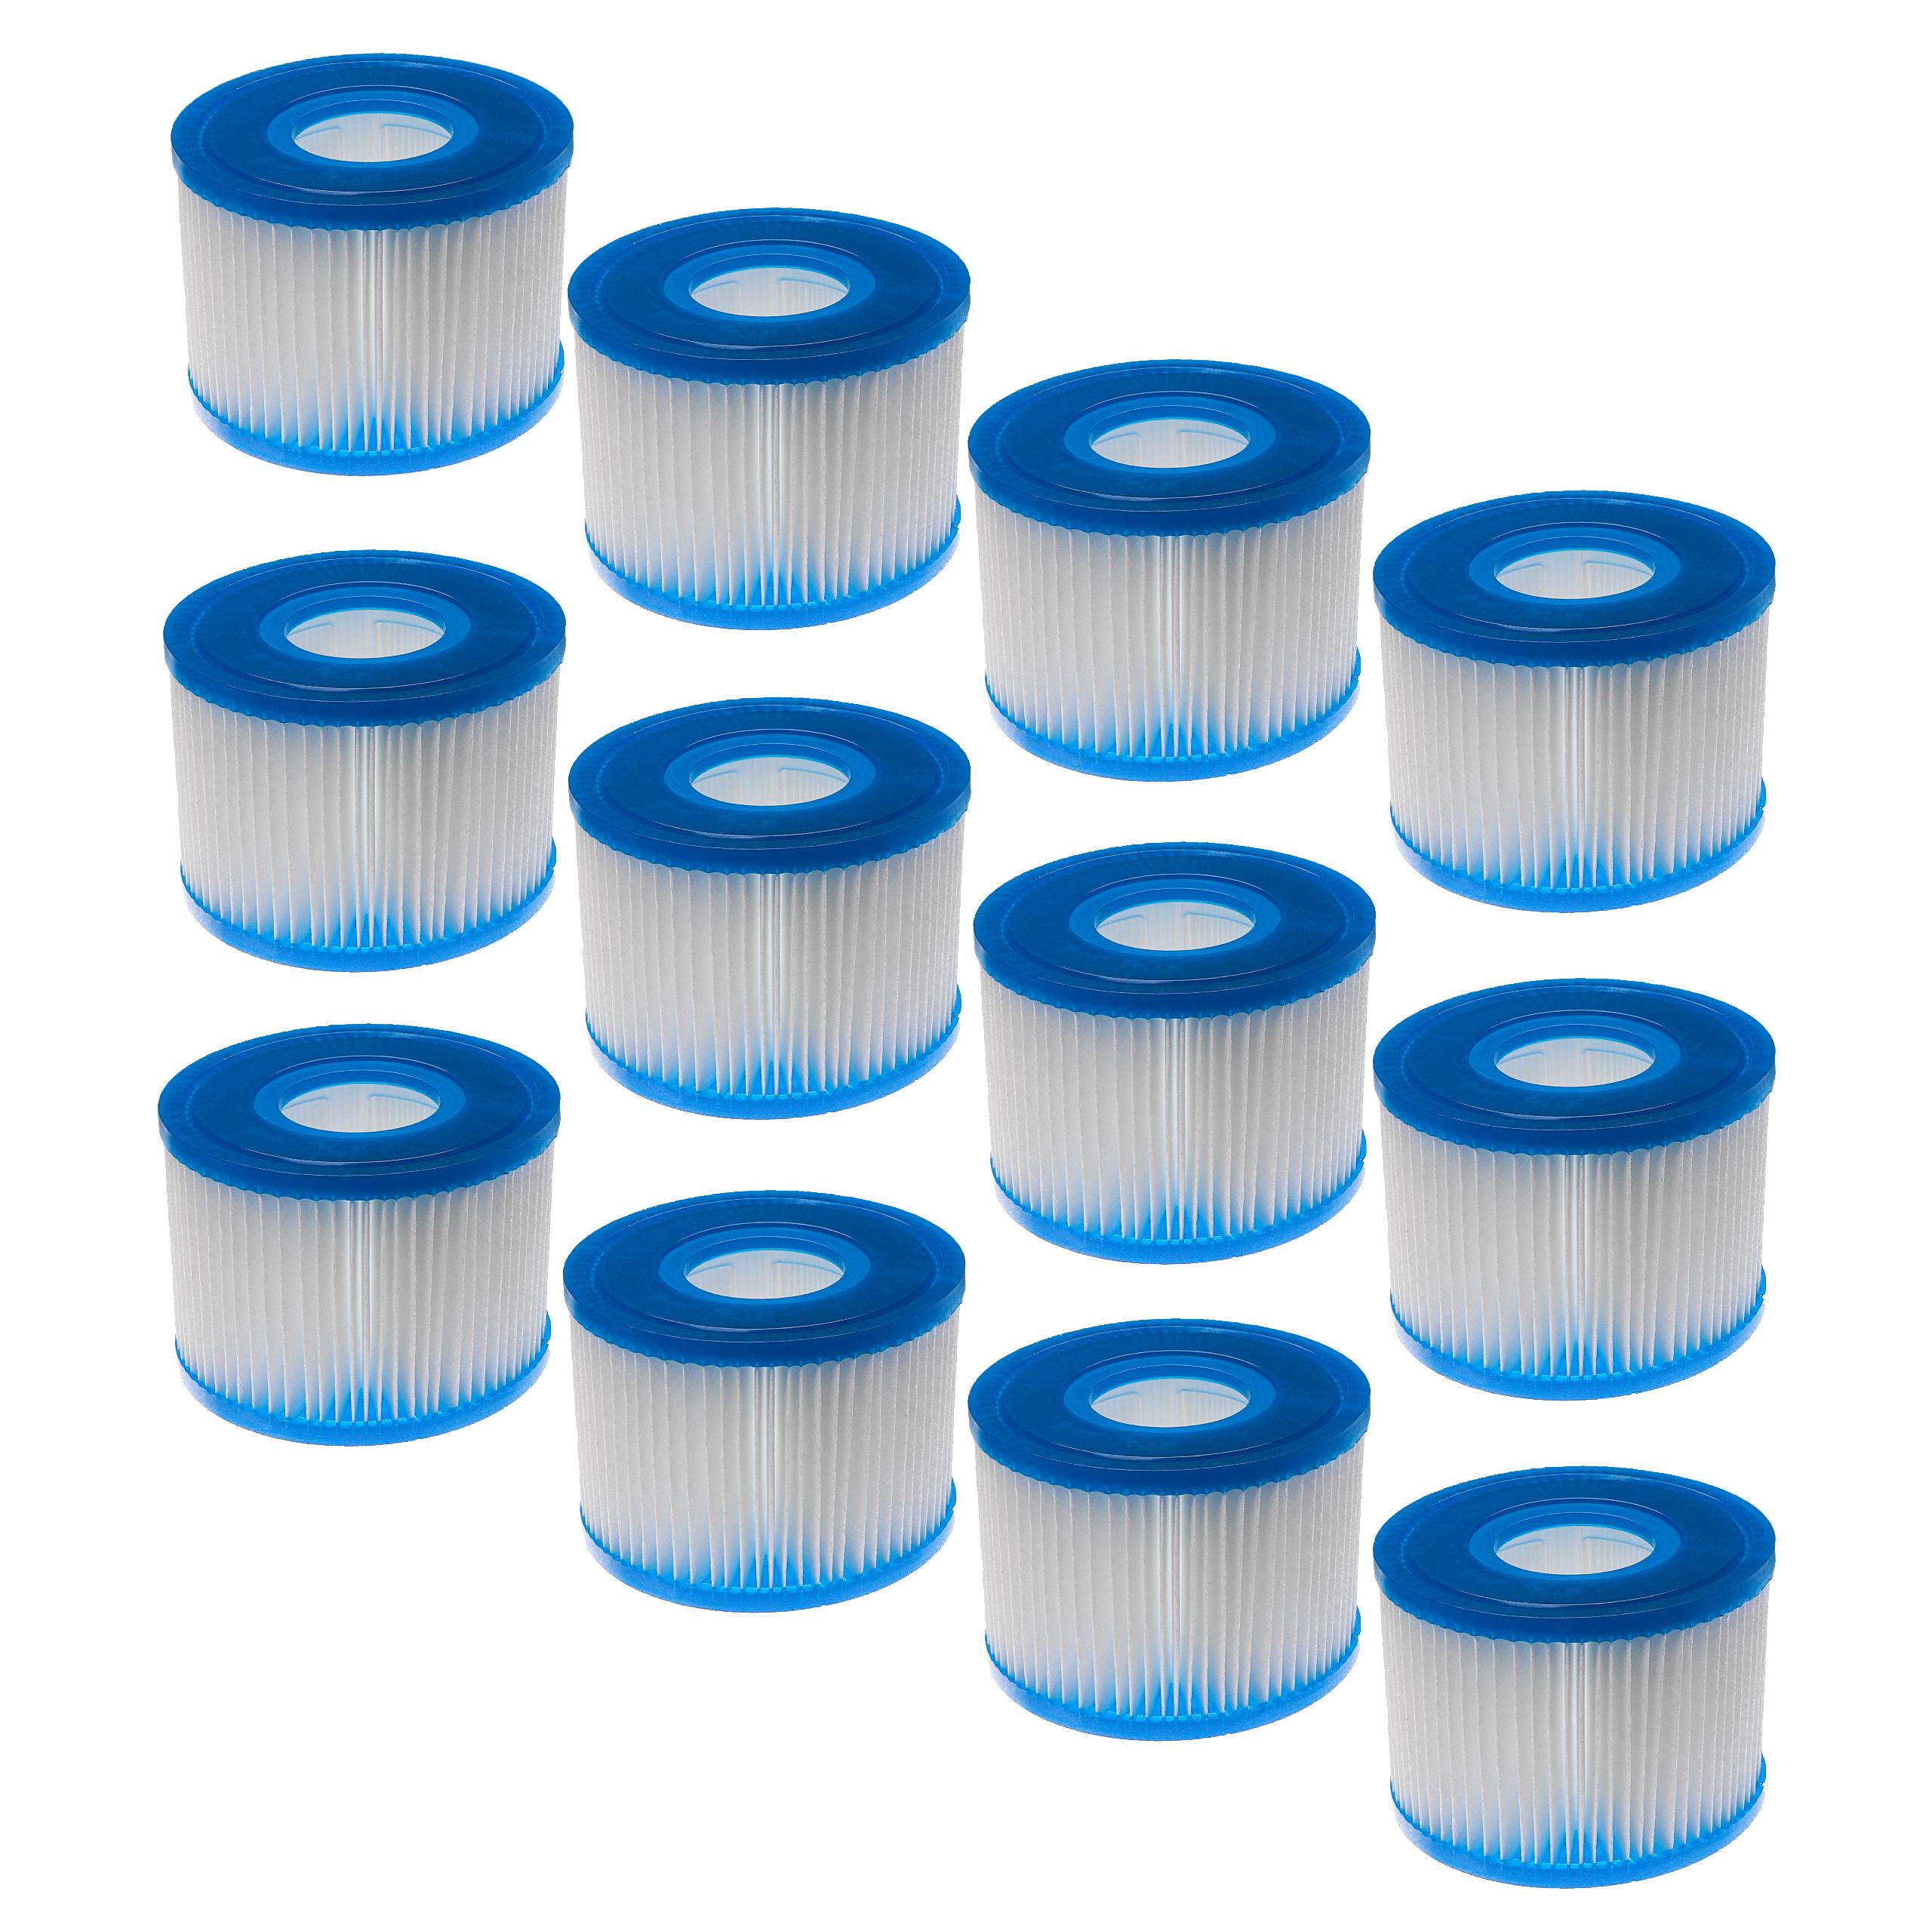 12x Pool Filter Type S1 as Replacement for Bestway FD2135 - Filter Cartridge